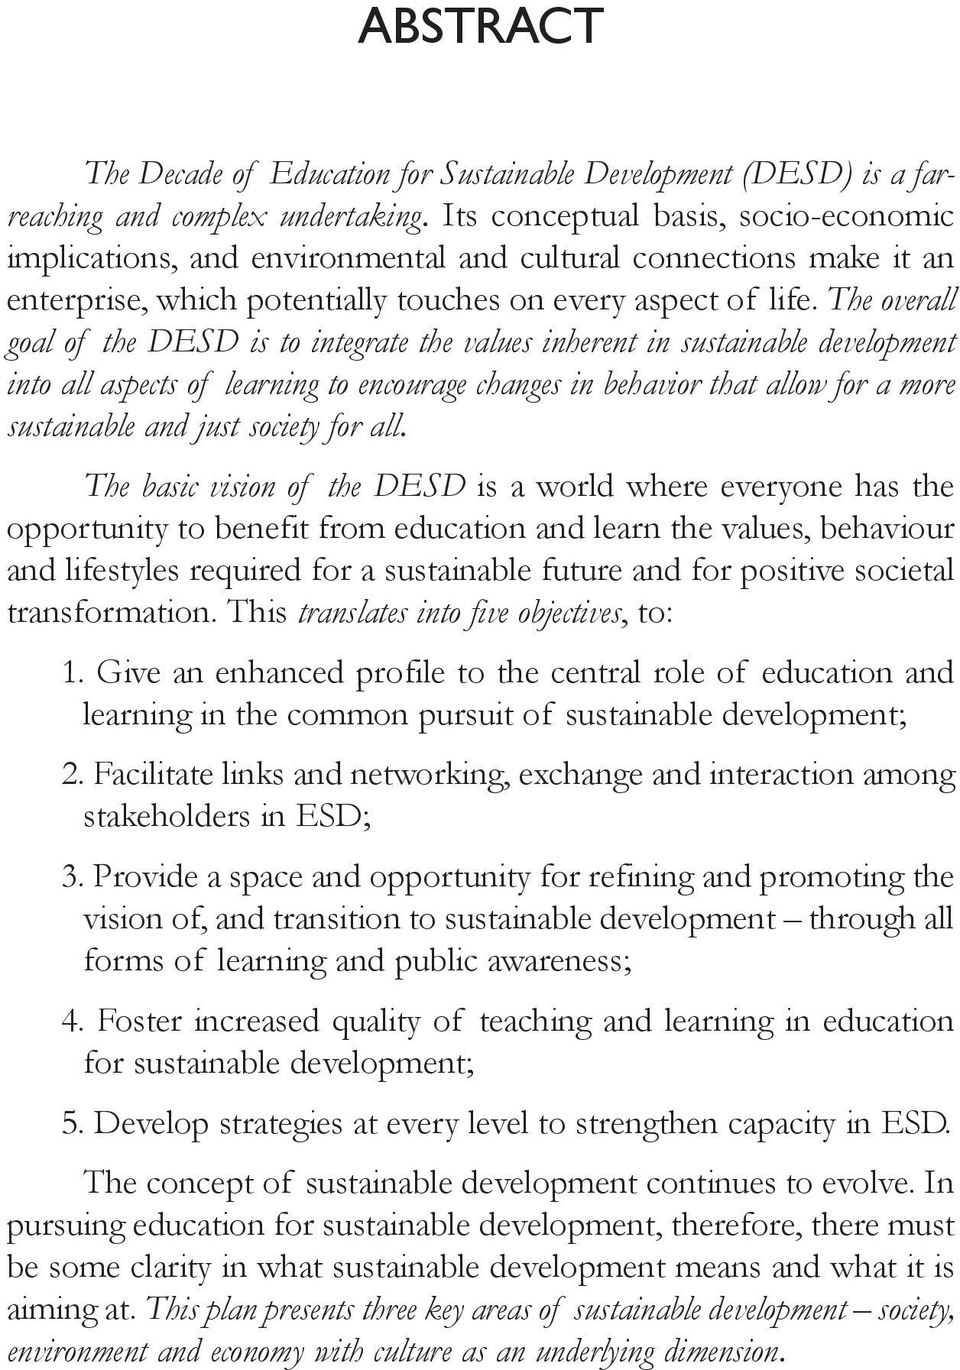 The overall goal of the DESD is to integrate the values inherent in sustainable development into all aspects of learning to encourage changes in behavior that allow for a more sustainable and just